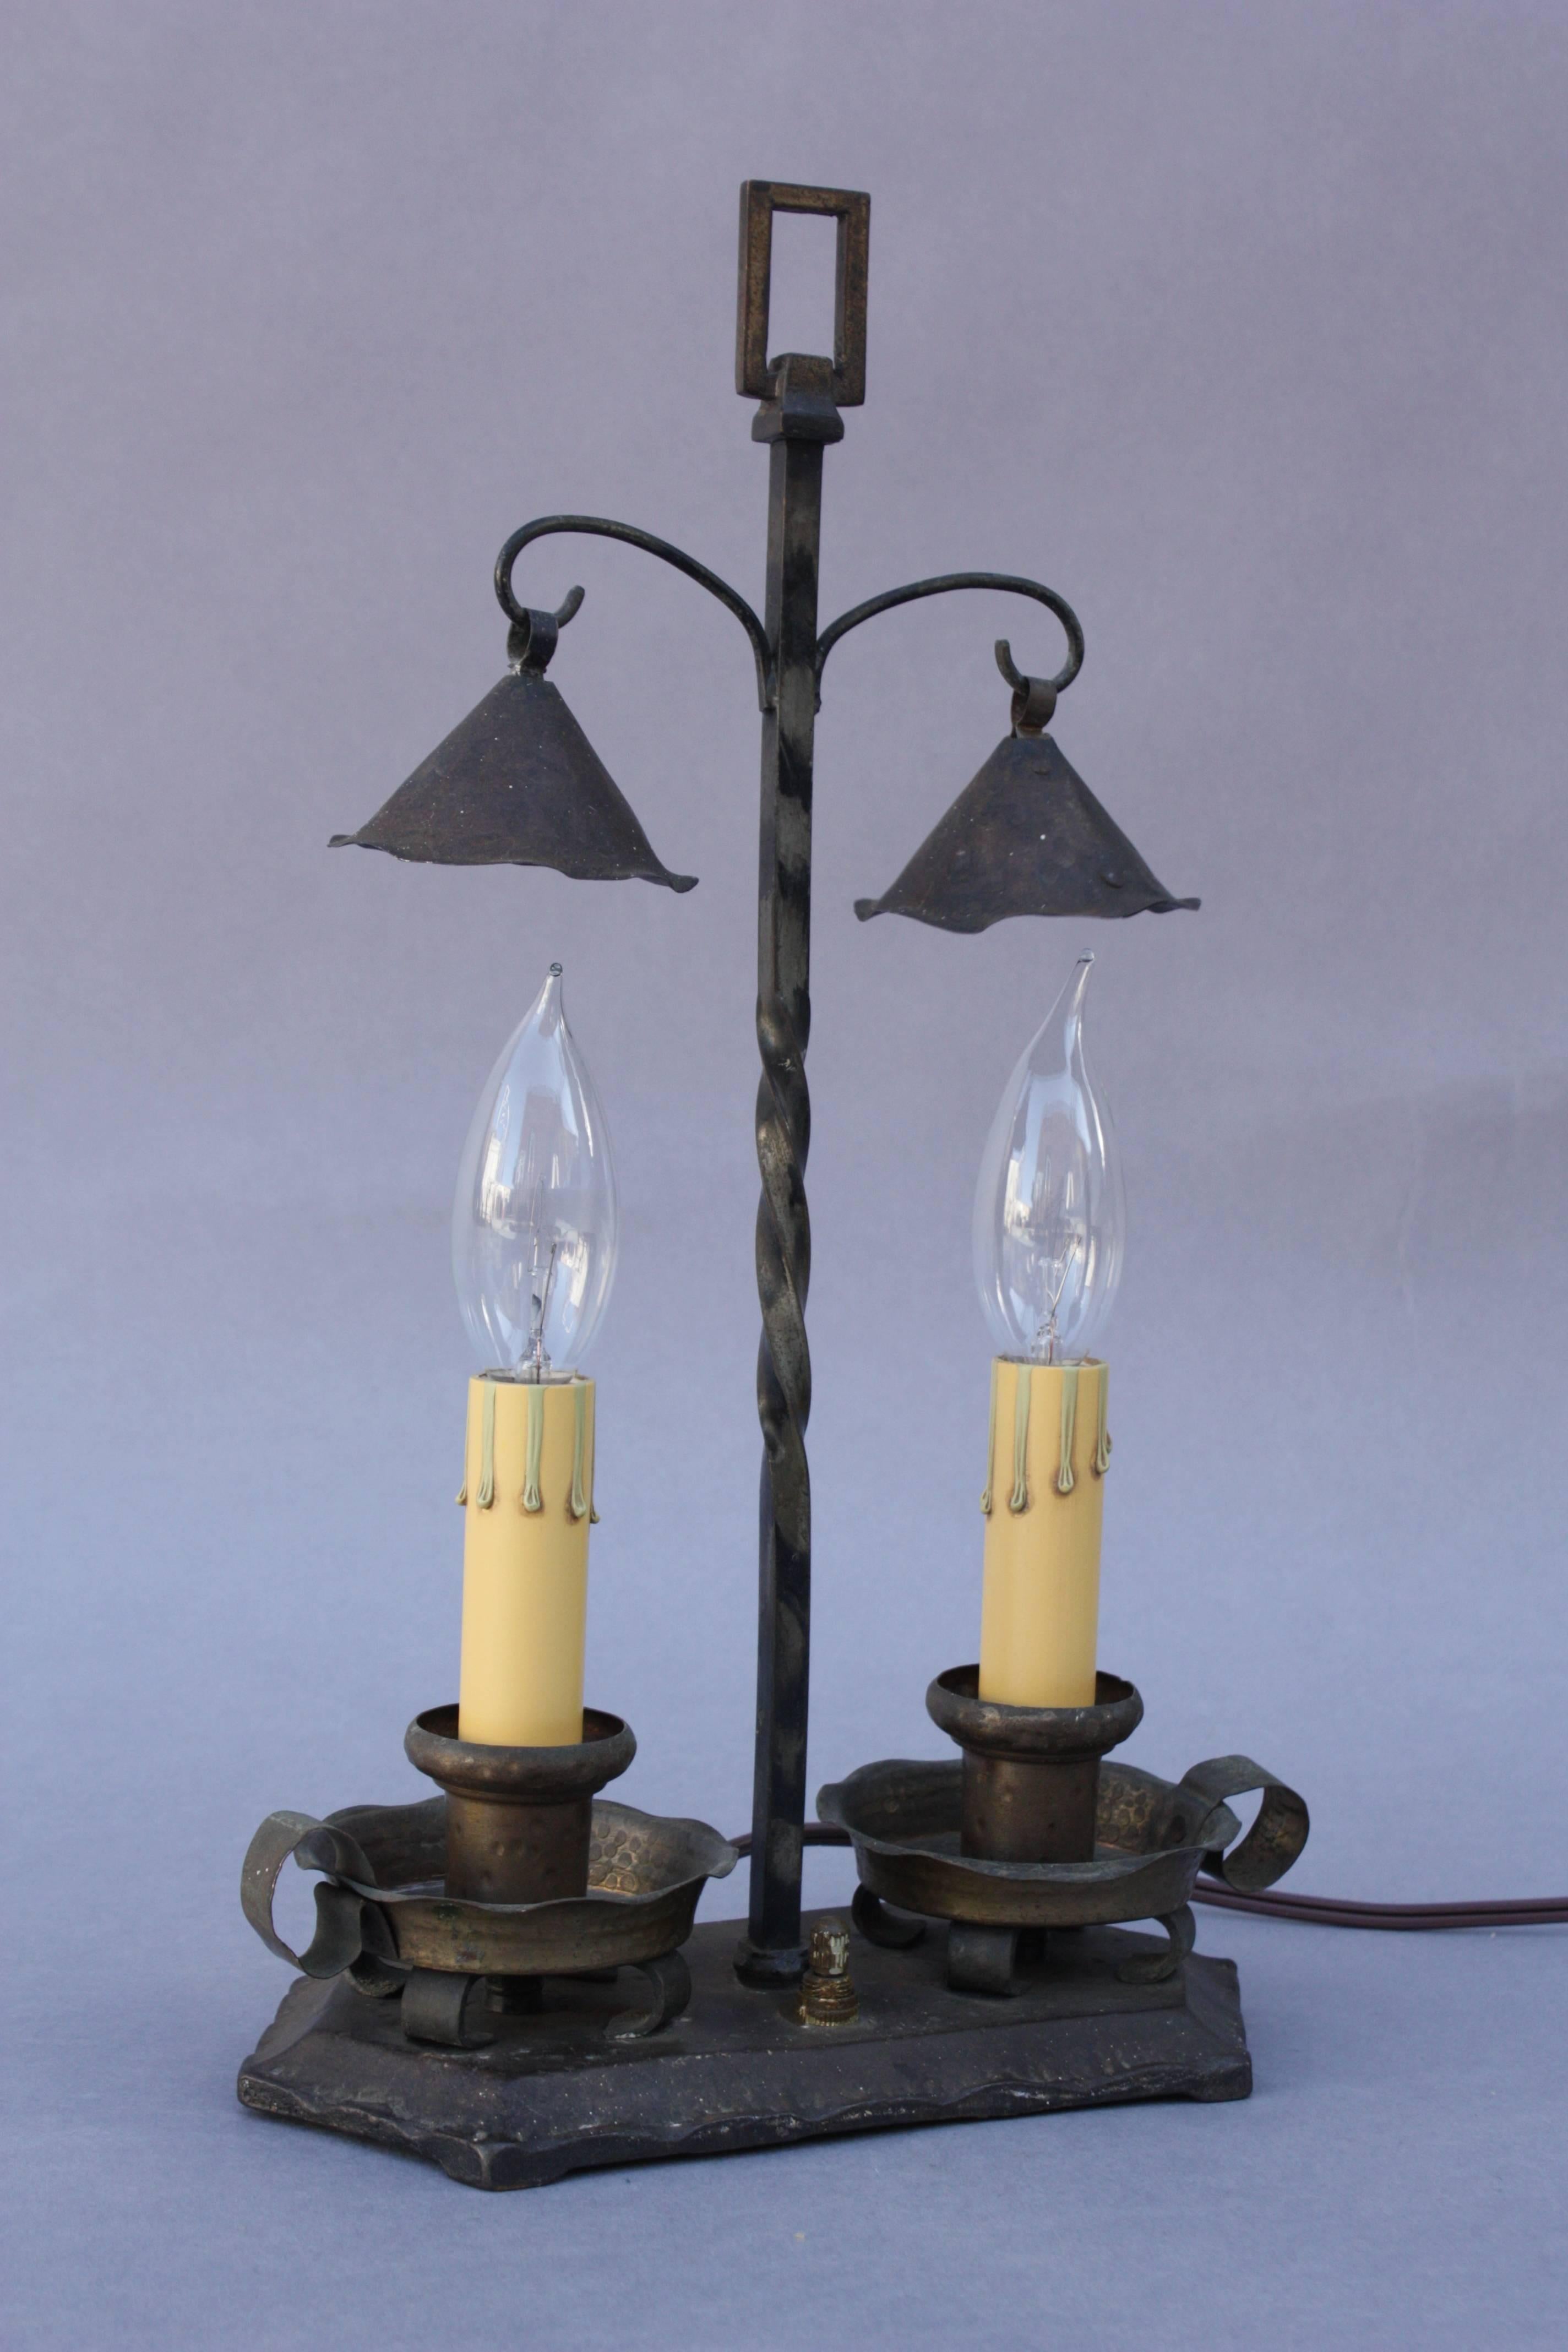 Quaint table lamps. Iron and brass construction, circa 1920s.